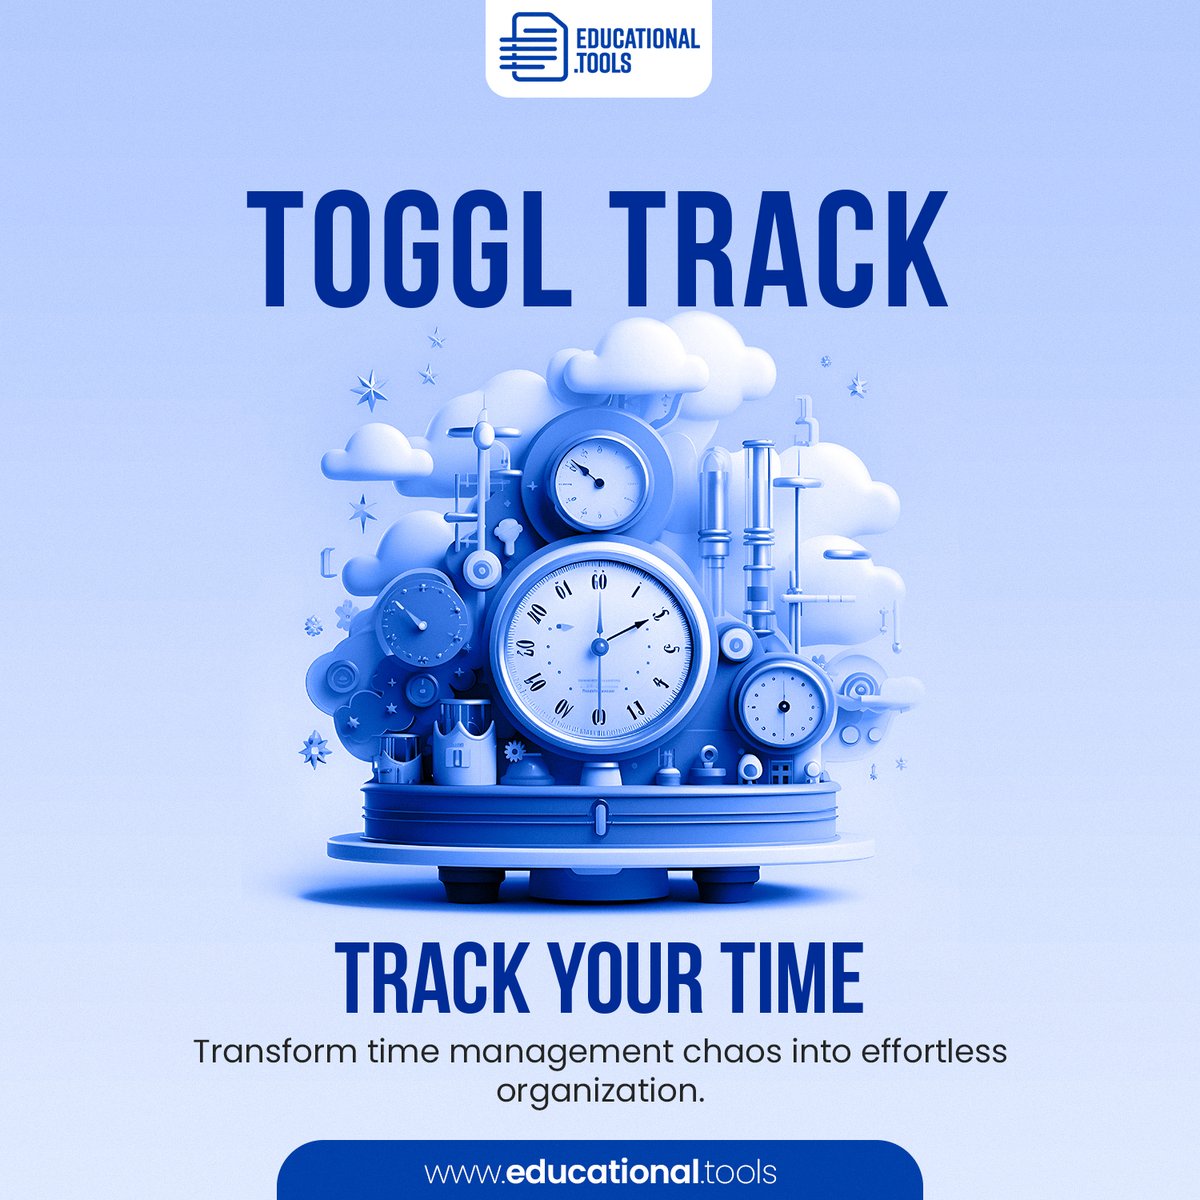 Toggl Track: Your All-in-One Toolkit for Time Tracking, Projects & Invoicing.
Stay organized and productive with Toggl Track's comprehensive tools!

educational.tools/toggl-track-yo…

#TogglTrack #TimeTracking #ProductivityTools #ProjectManagement #InvoicingSoftware